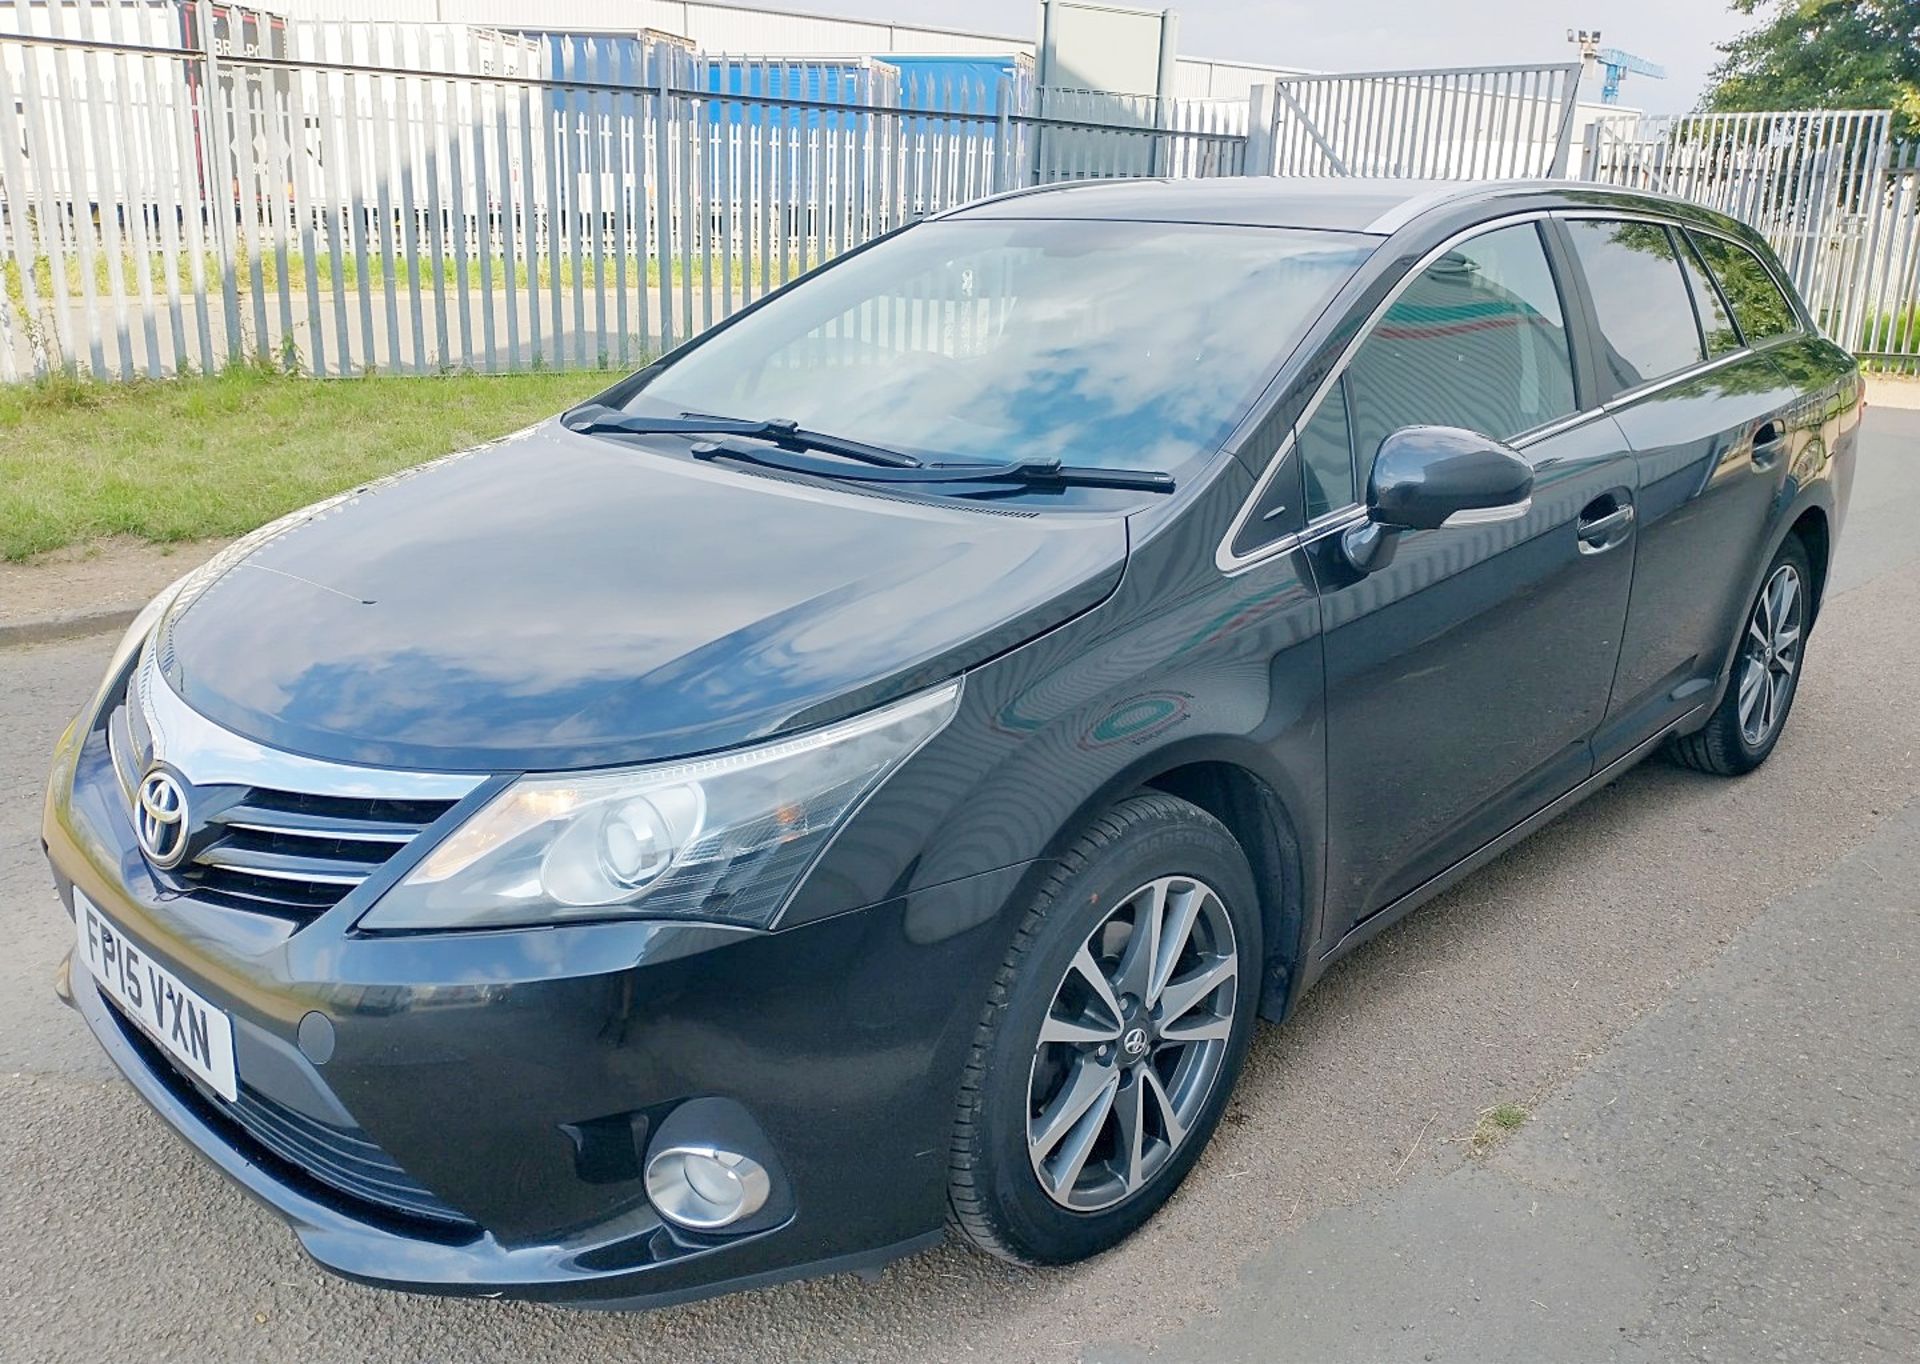 2015 Toyota Avensis Icon Business Ed D-40 5dr Estate  - CL505 - NO VAT ON THE HAMMER - Location: - Image 5 of 18